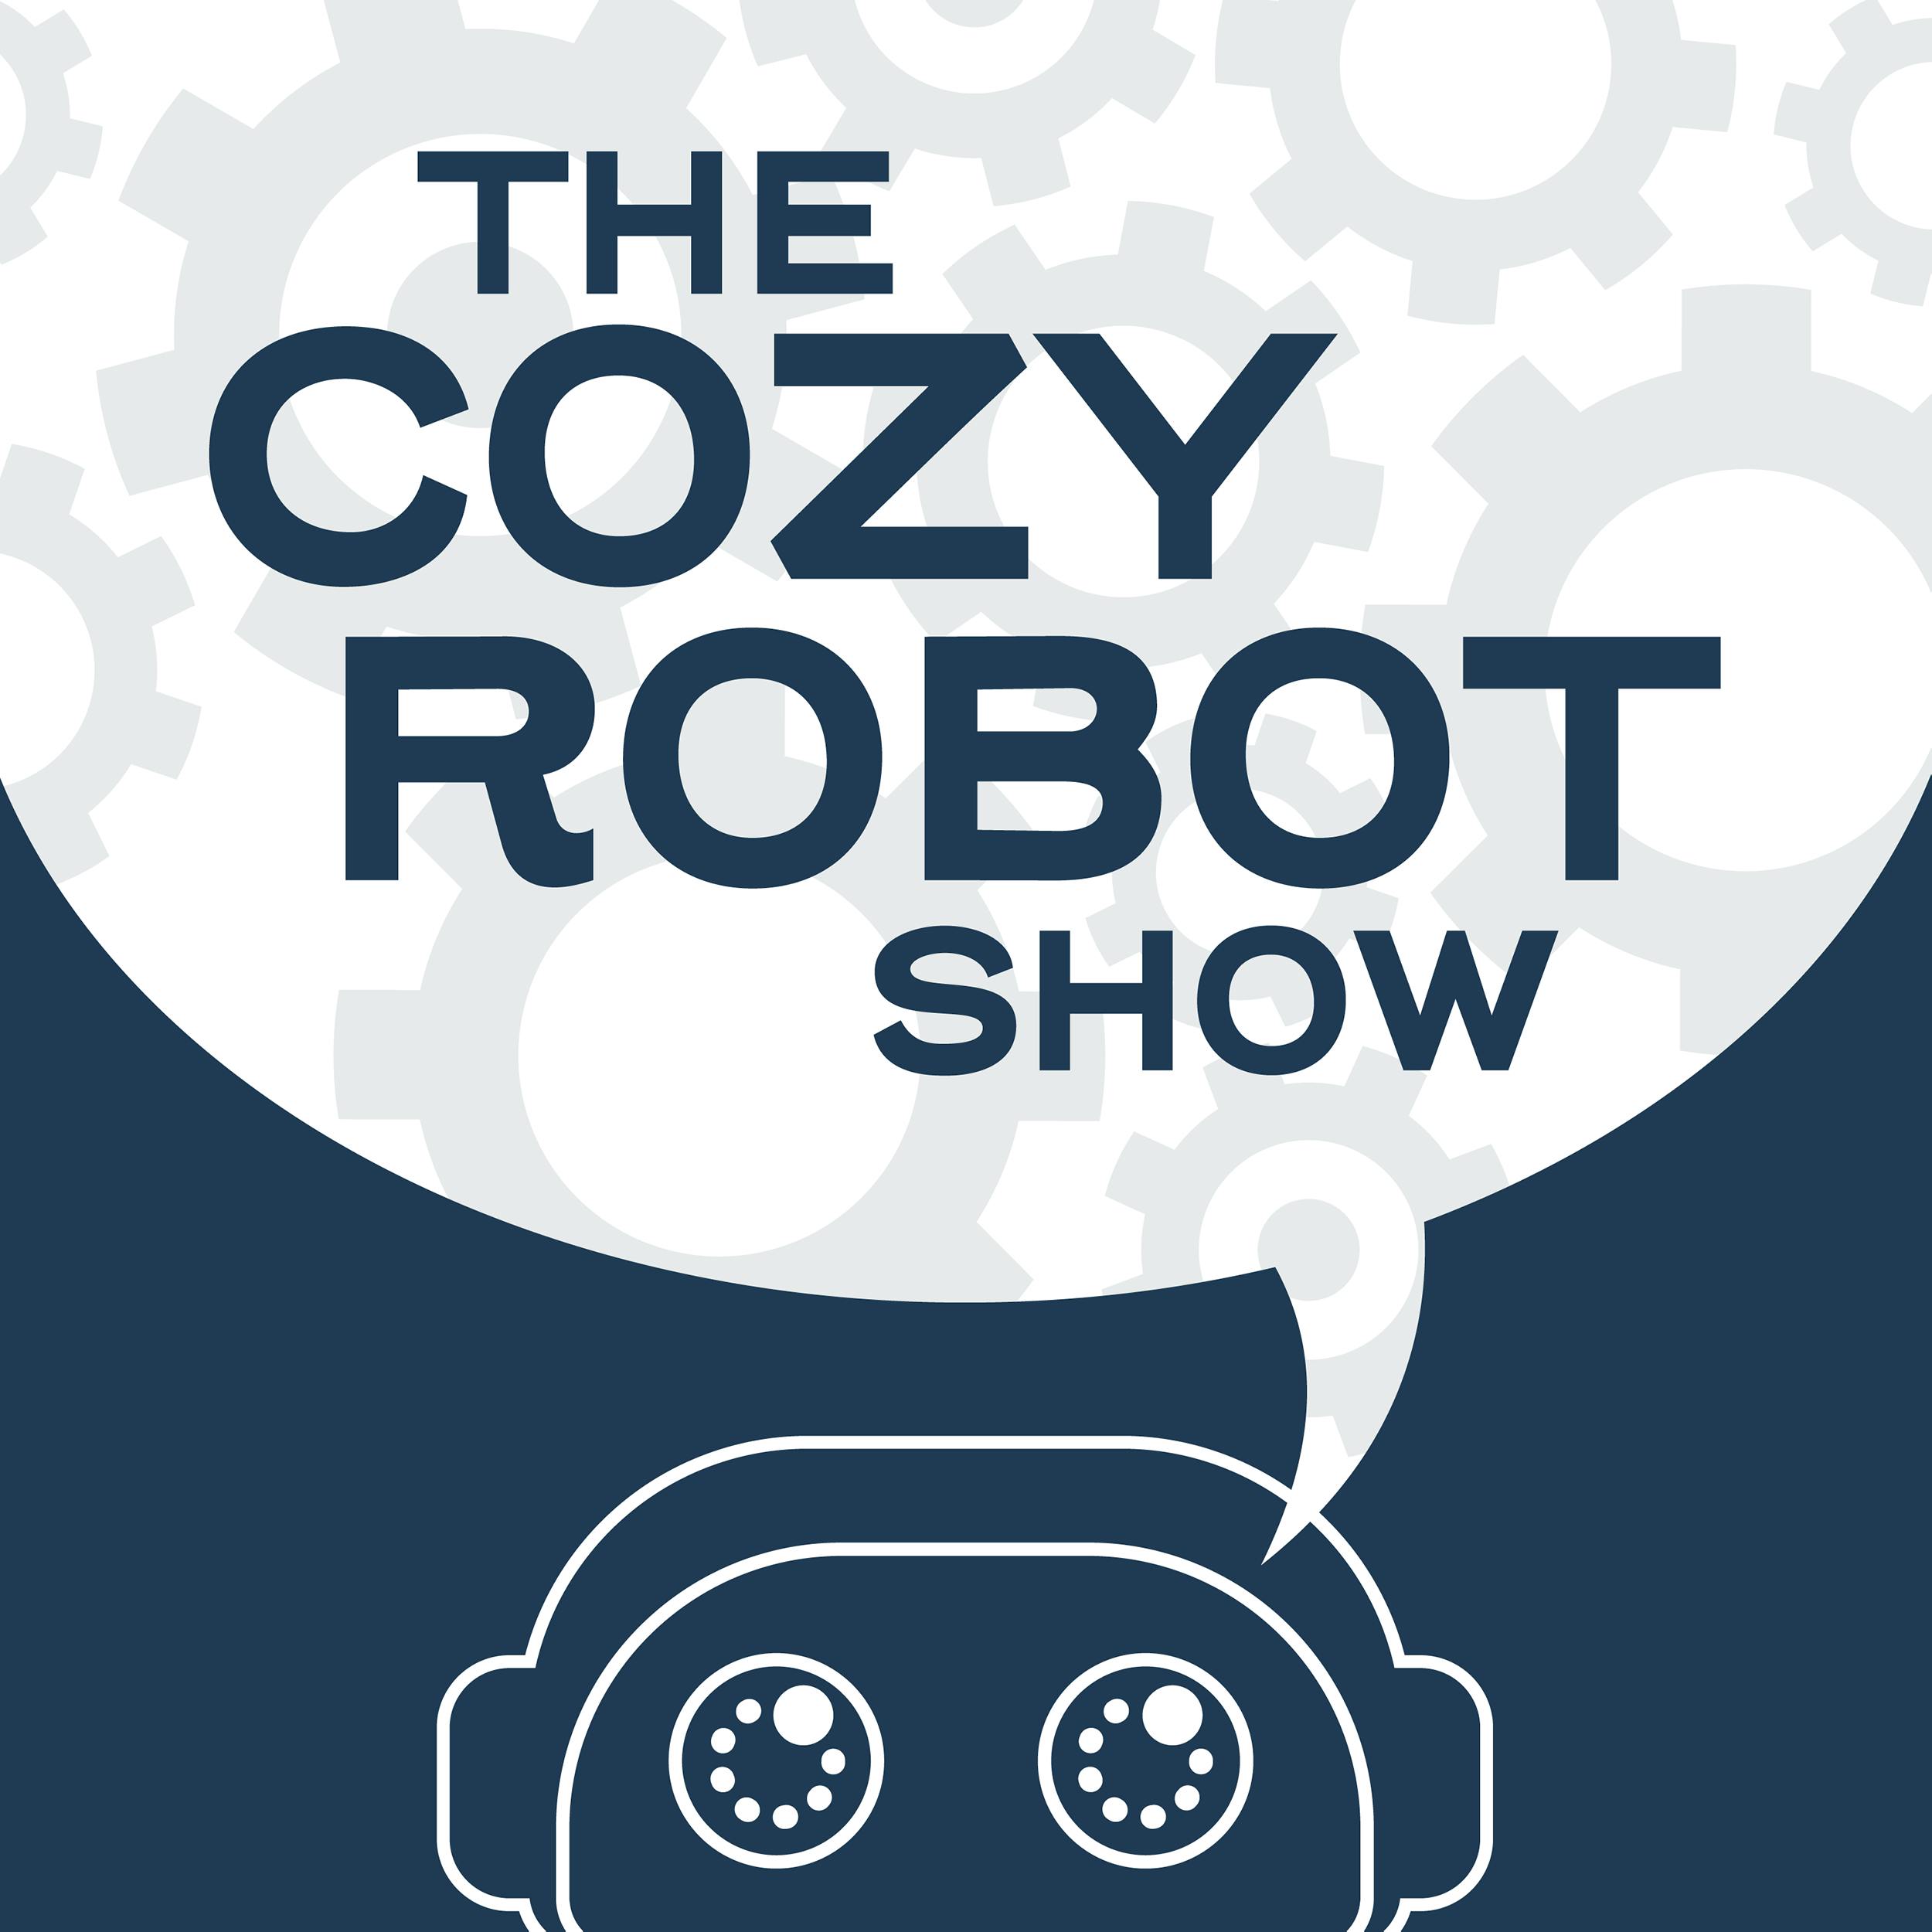 Cozy Robot Show: Self-Celebration: A Discussion About Disability with Guest Host Stephanie Tait